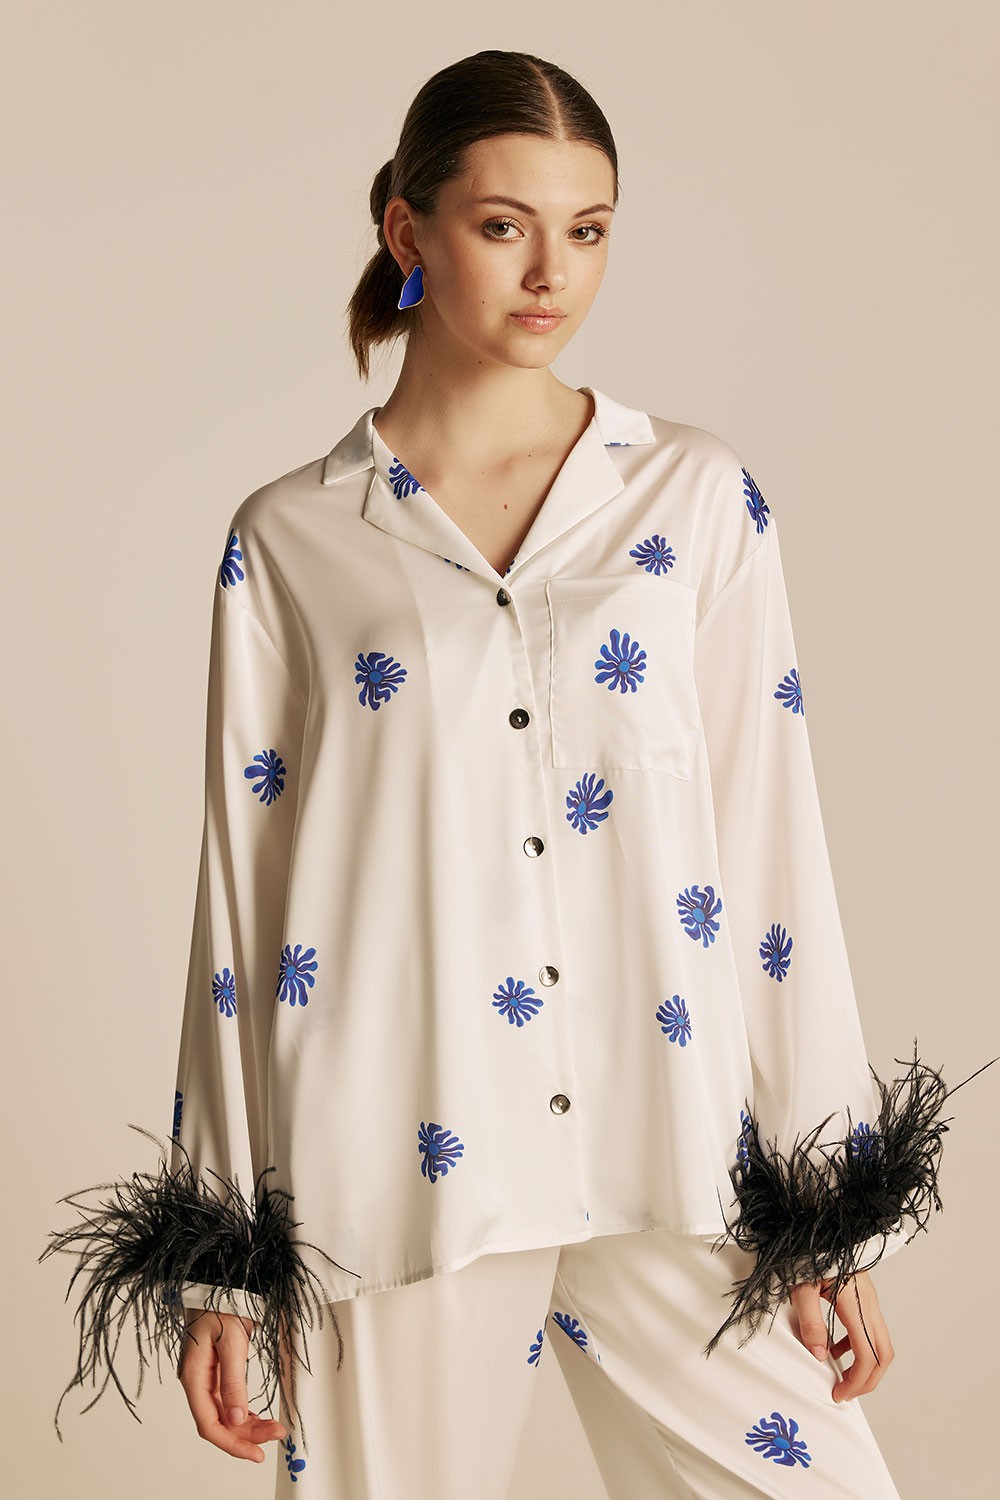 MILKWHITE shirt with feathers